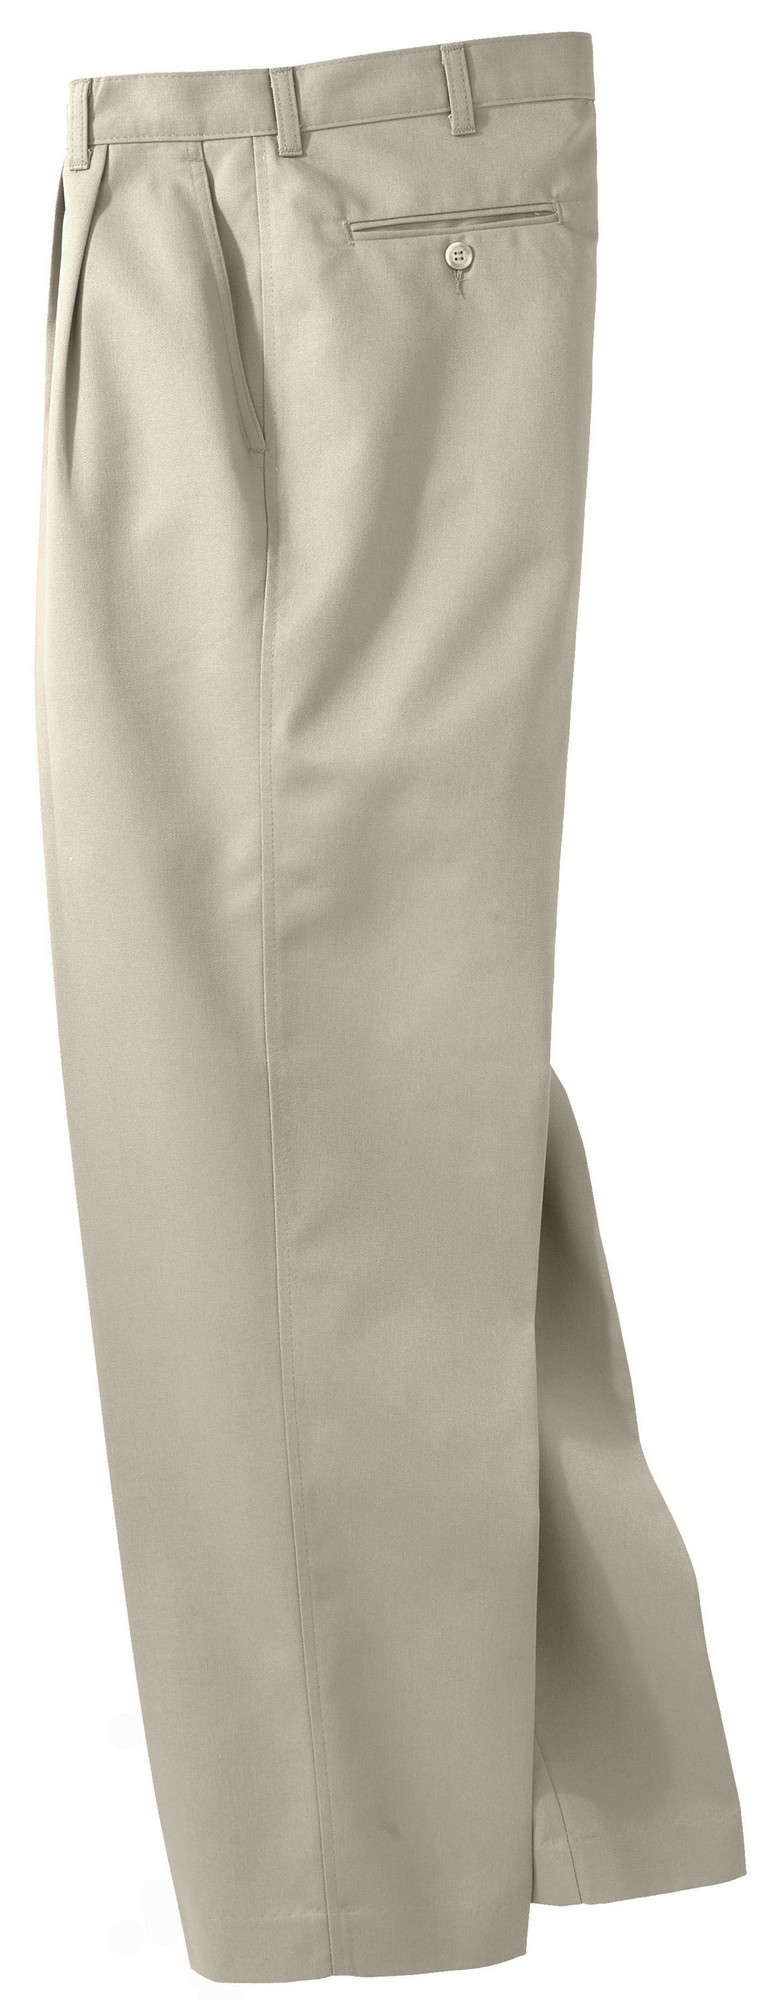 Edwards Men's Blended Chino Pleated Pant